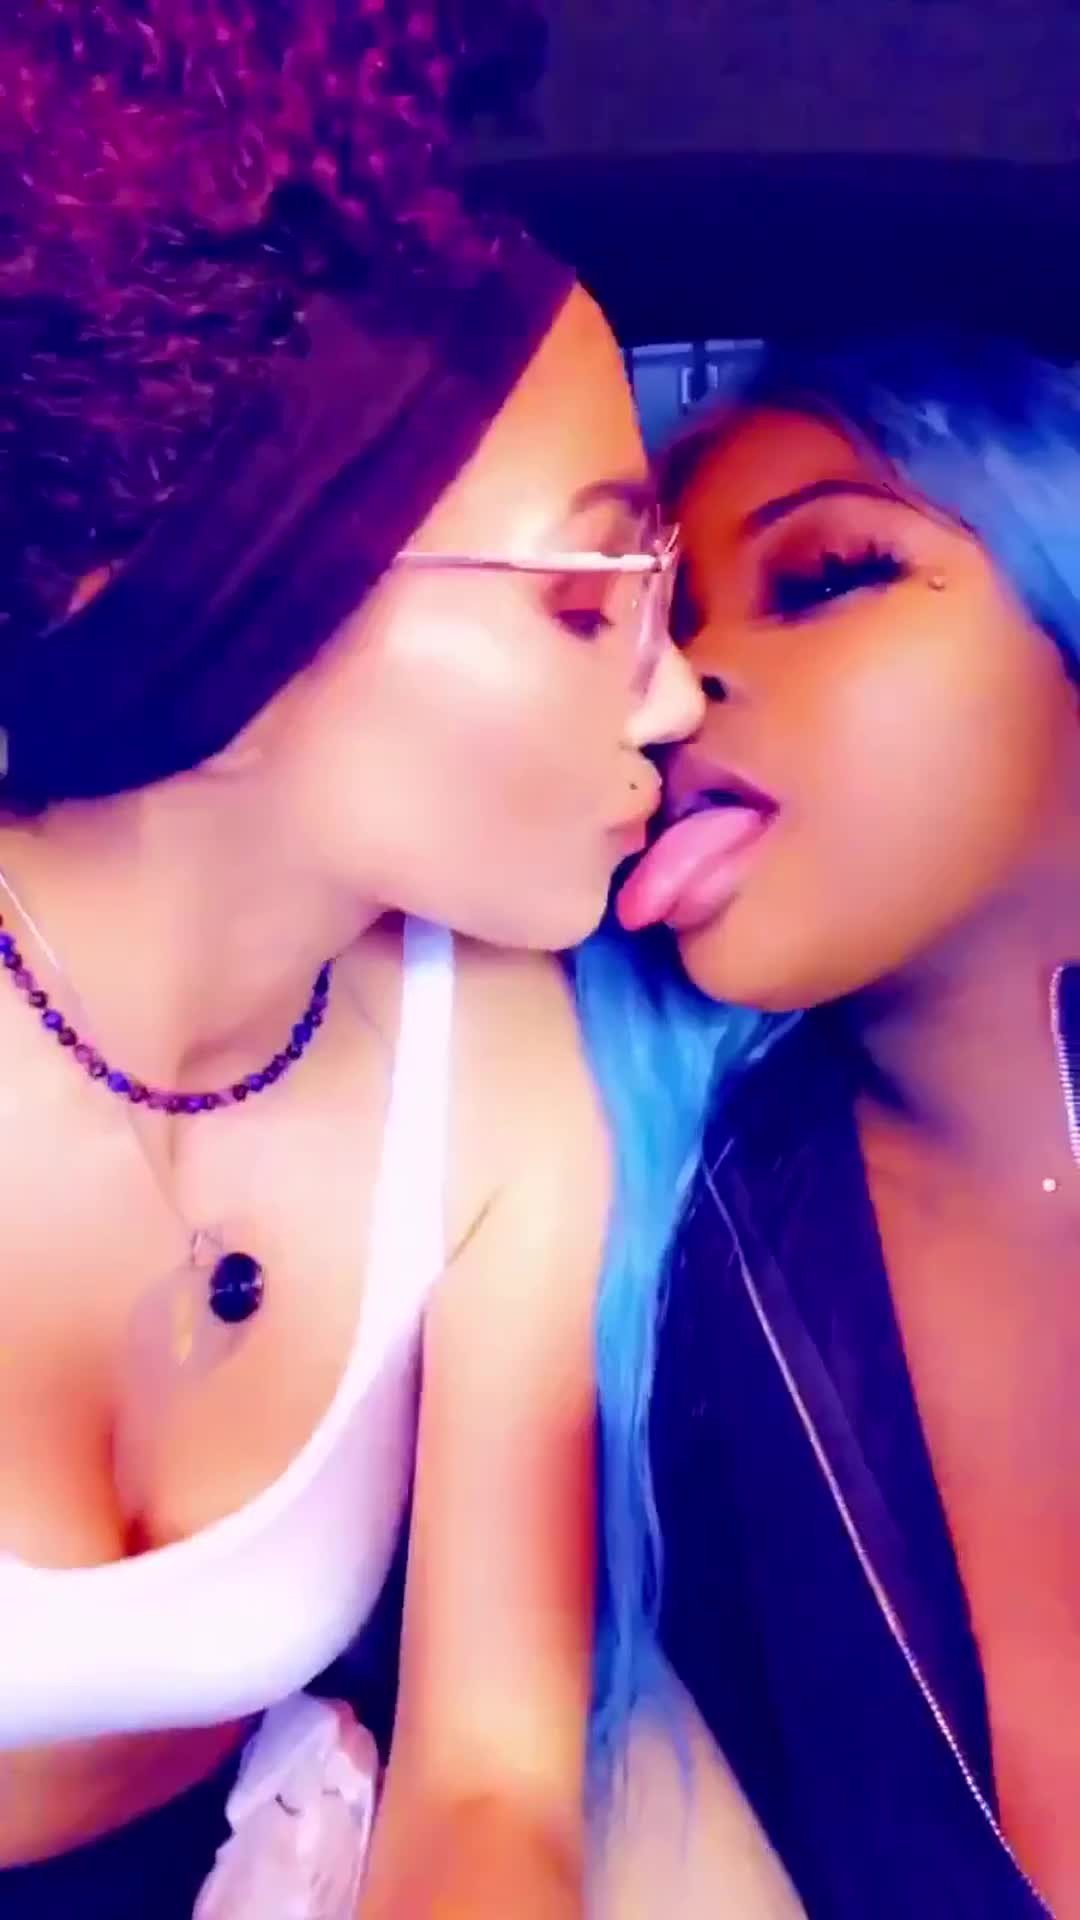 Video post by Sexy.Sarah0